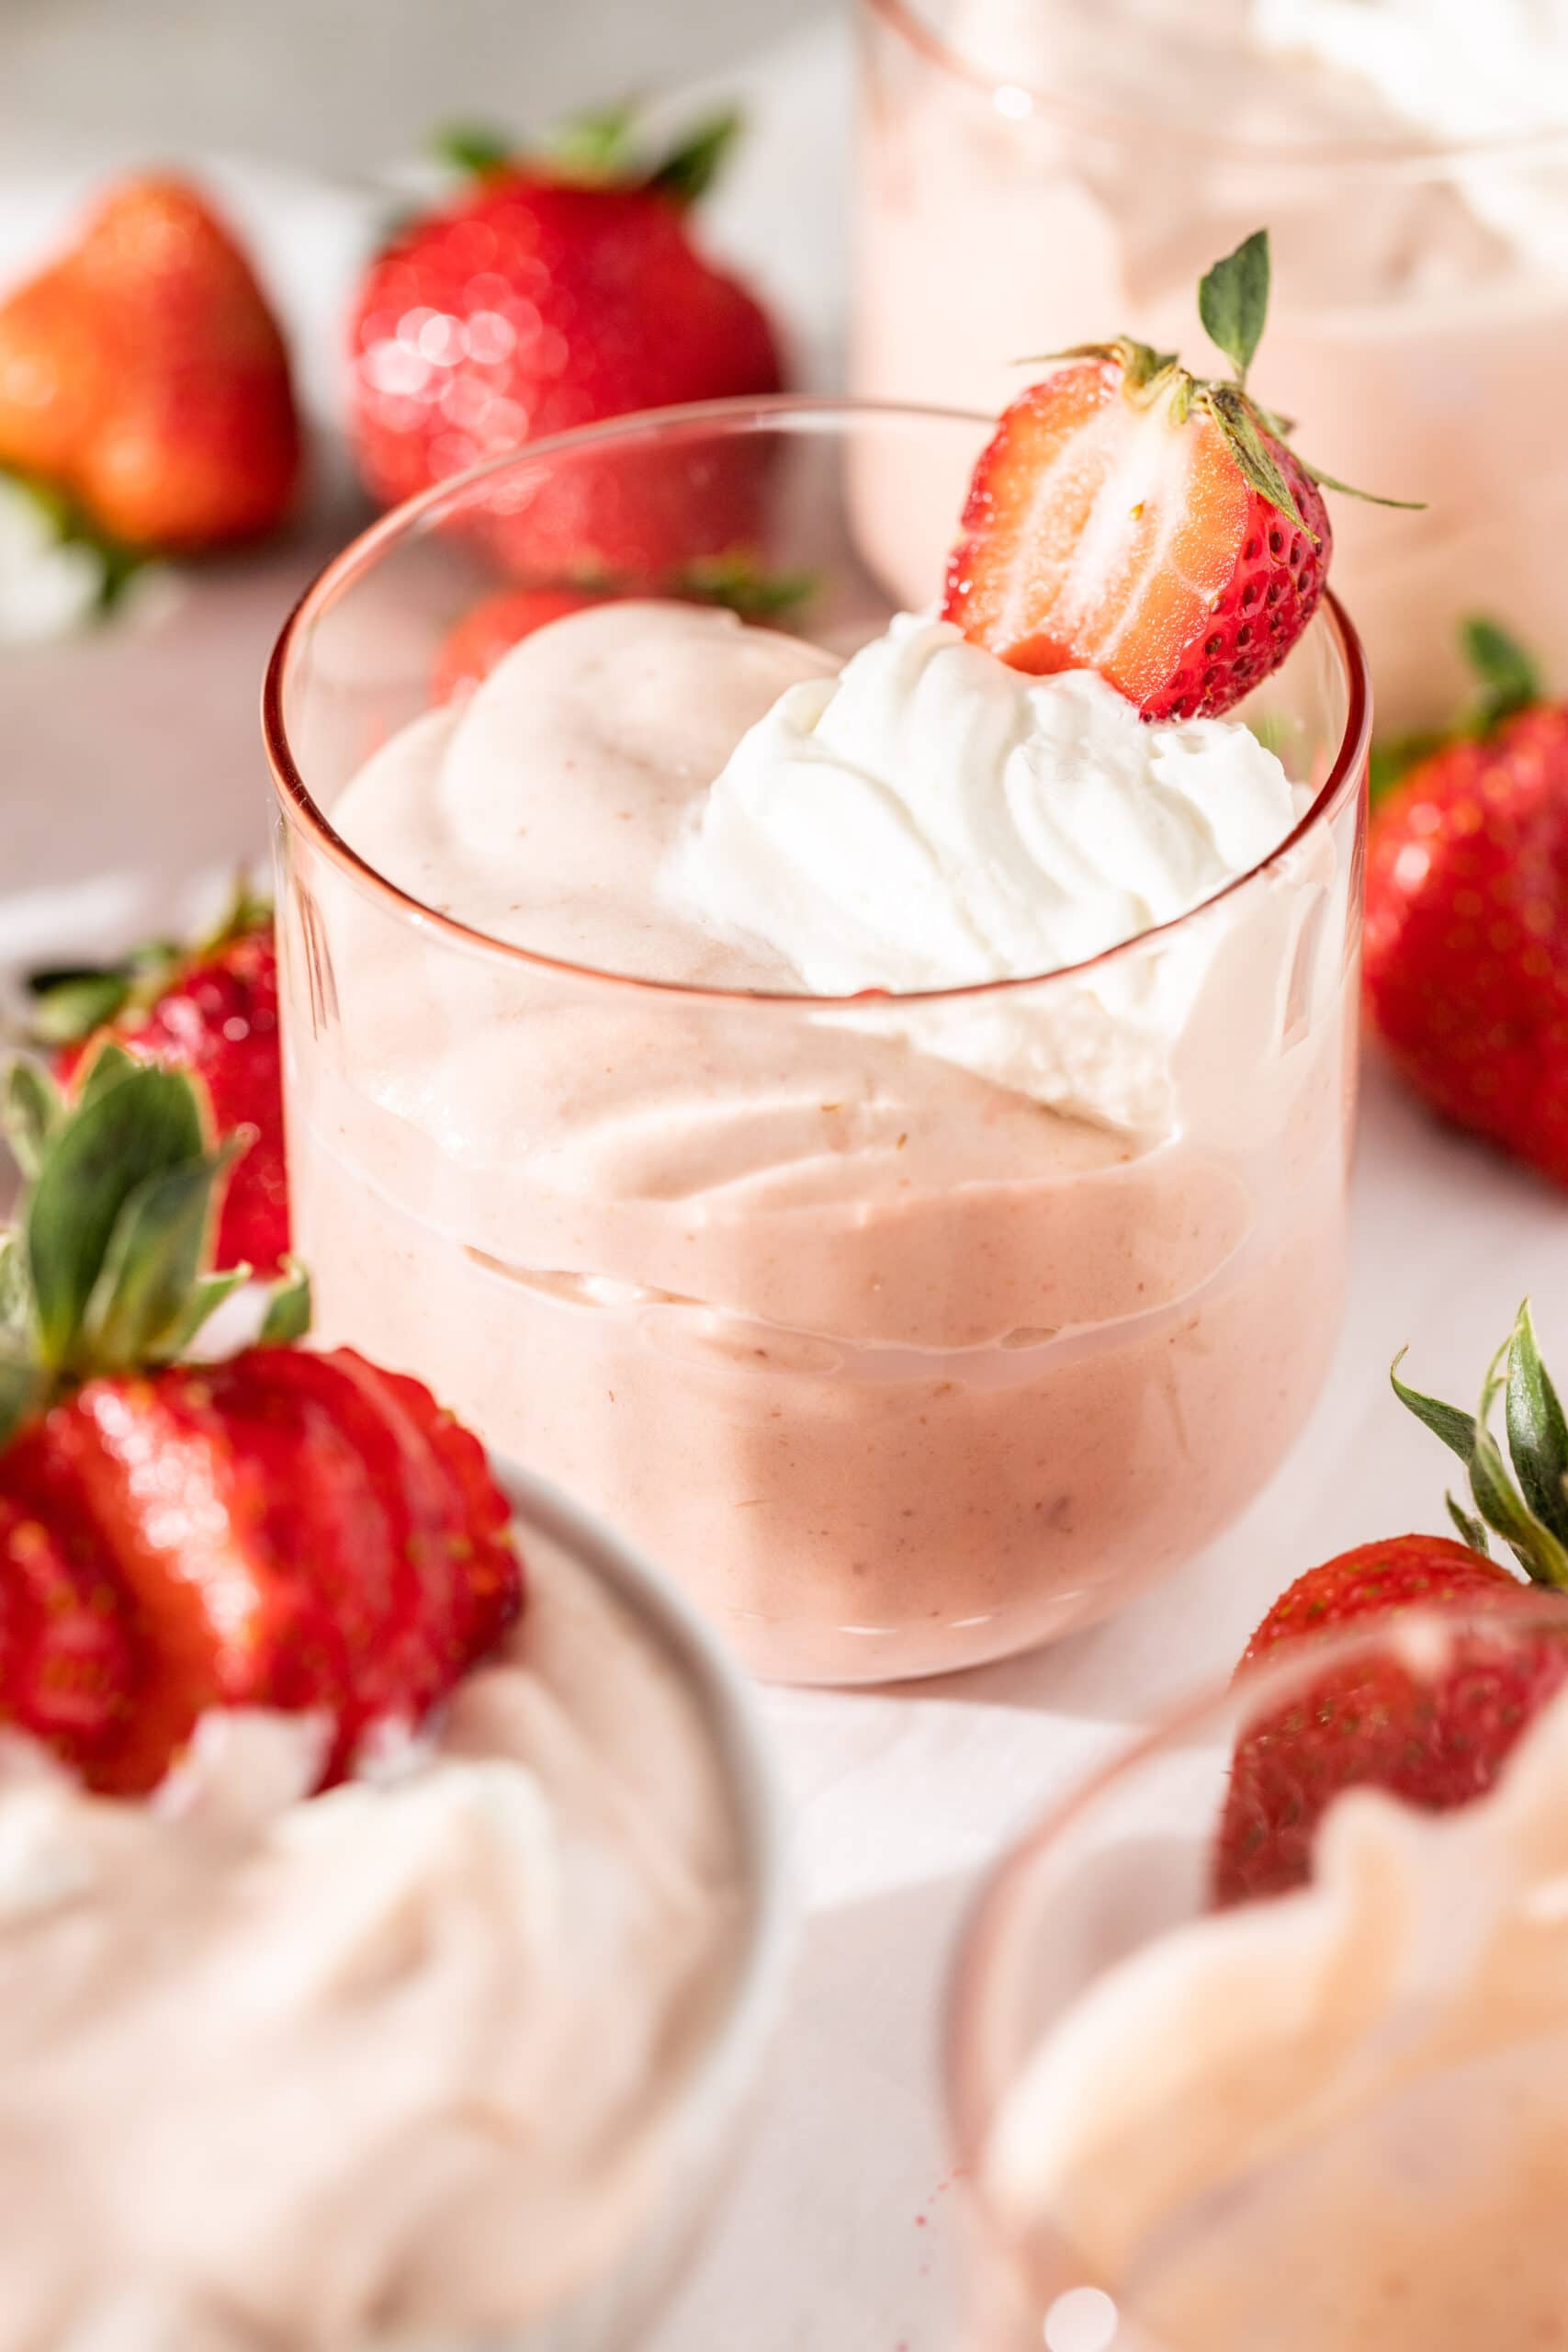 Side view of a pink glass filled with strawberry bavarian cream, topped with whipped cream and a fresh strawberry half.